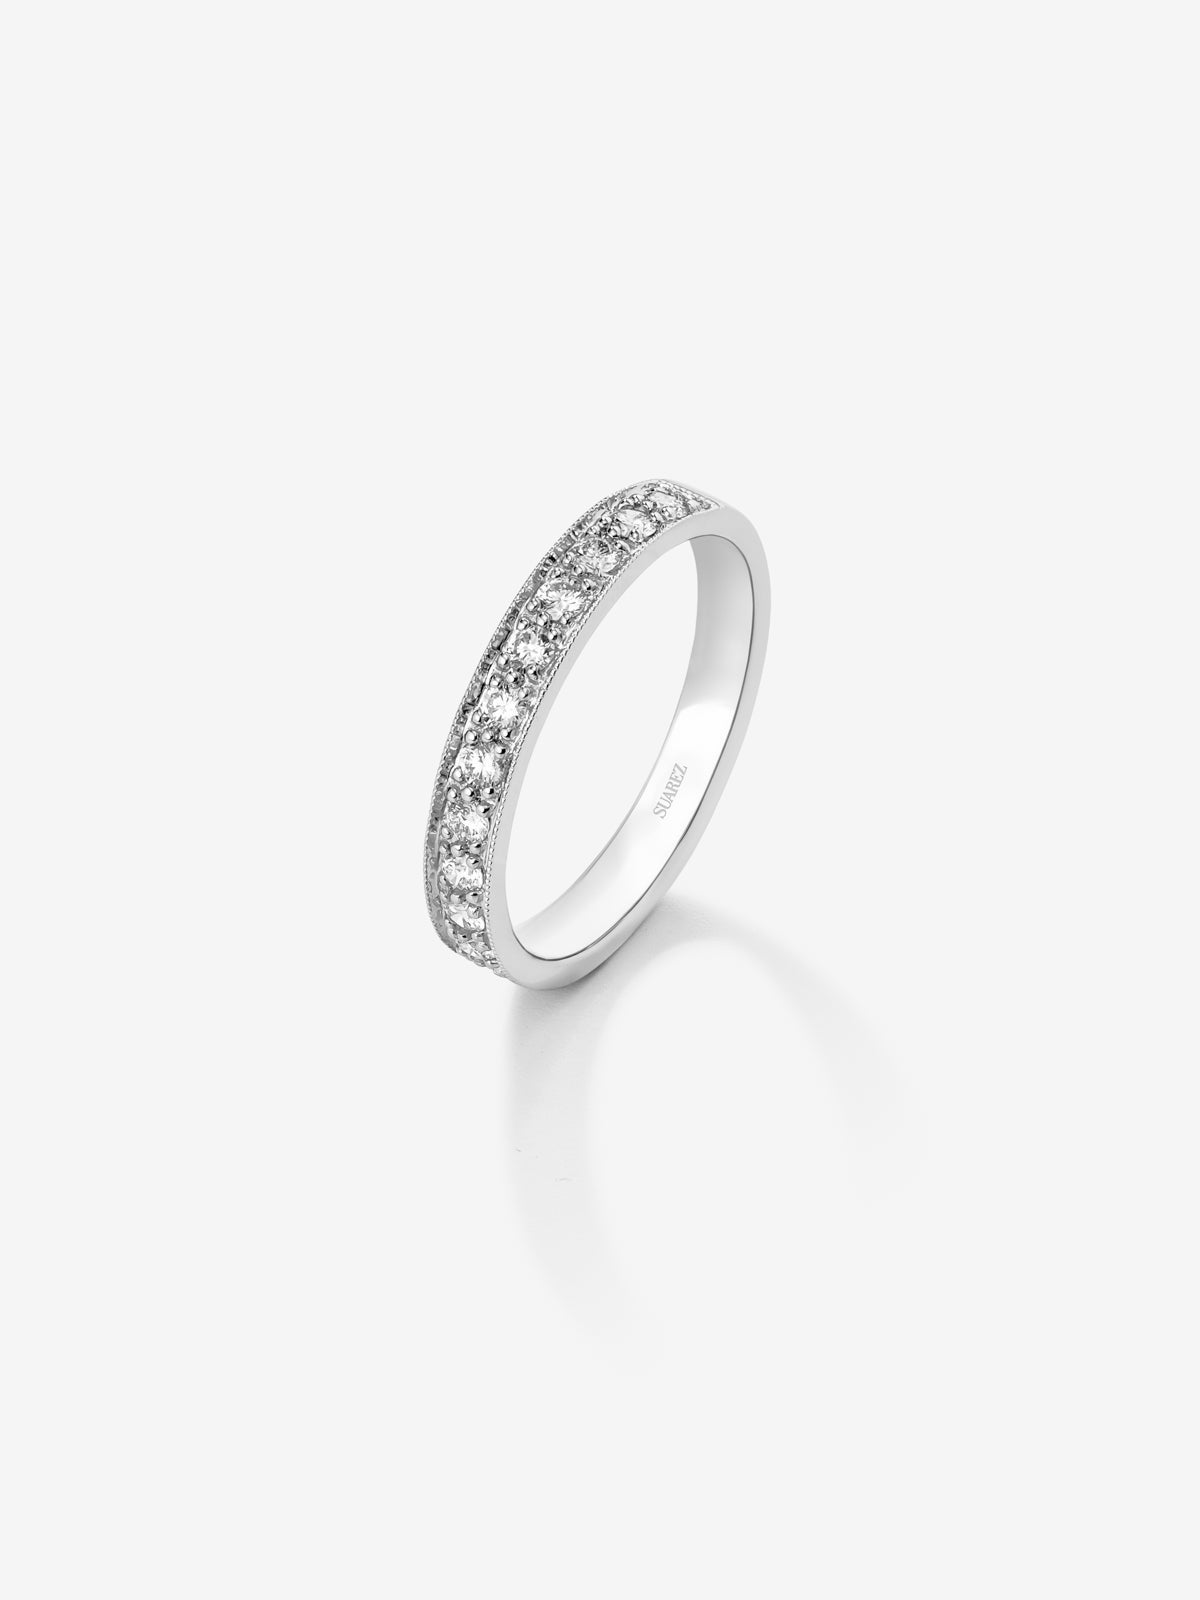 Half ring in 18K white gold with 13 brilliant-cut diamonds with a total of 0.36 cts